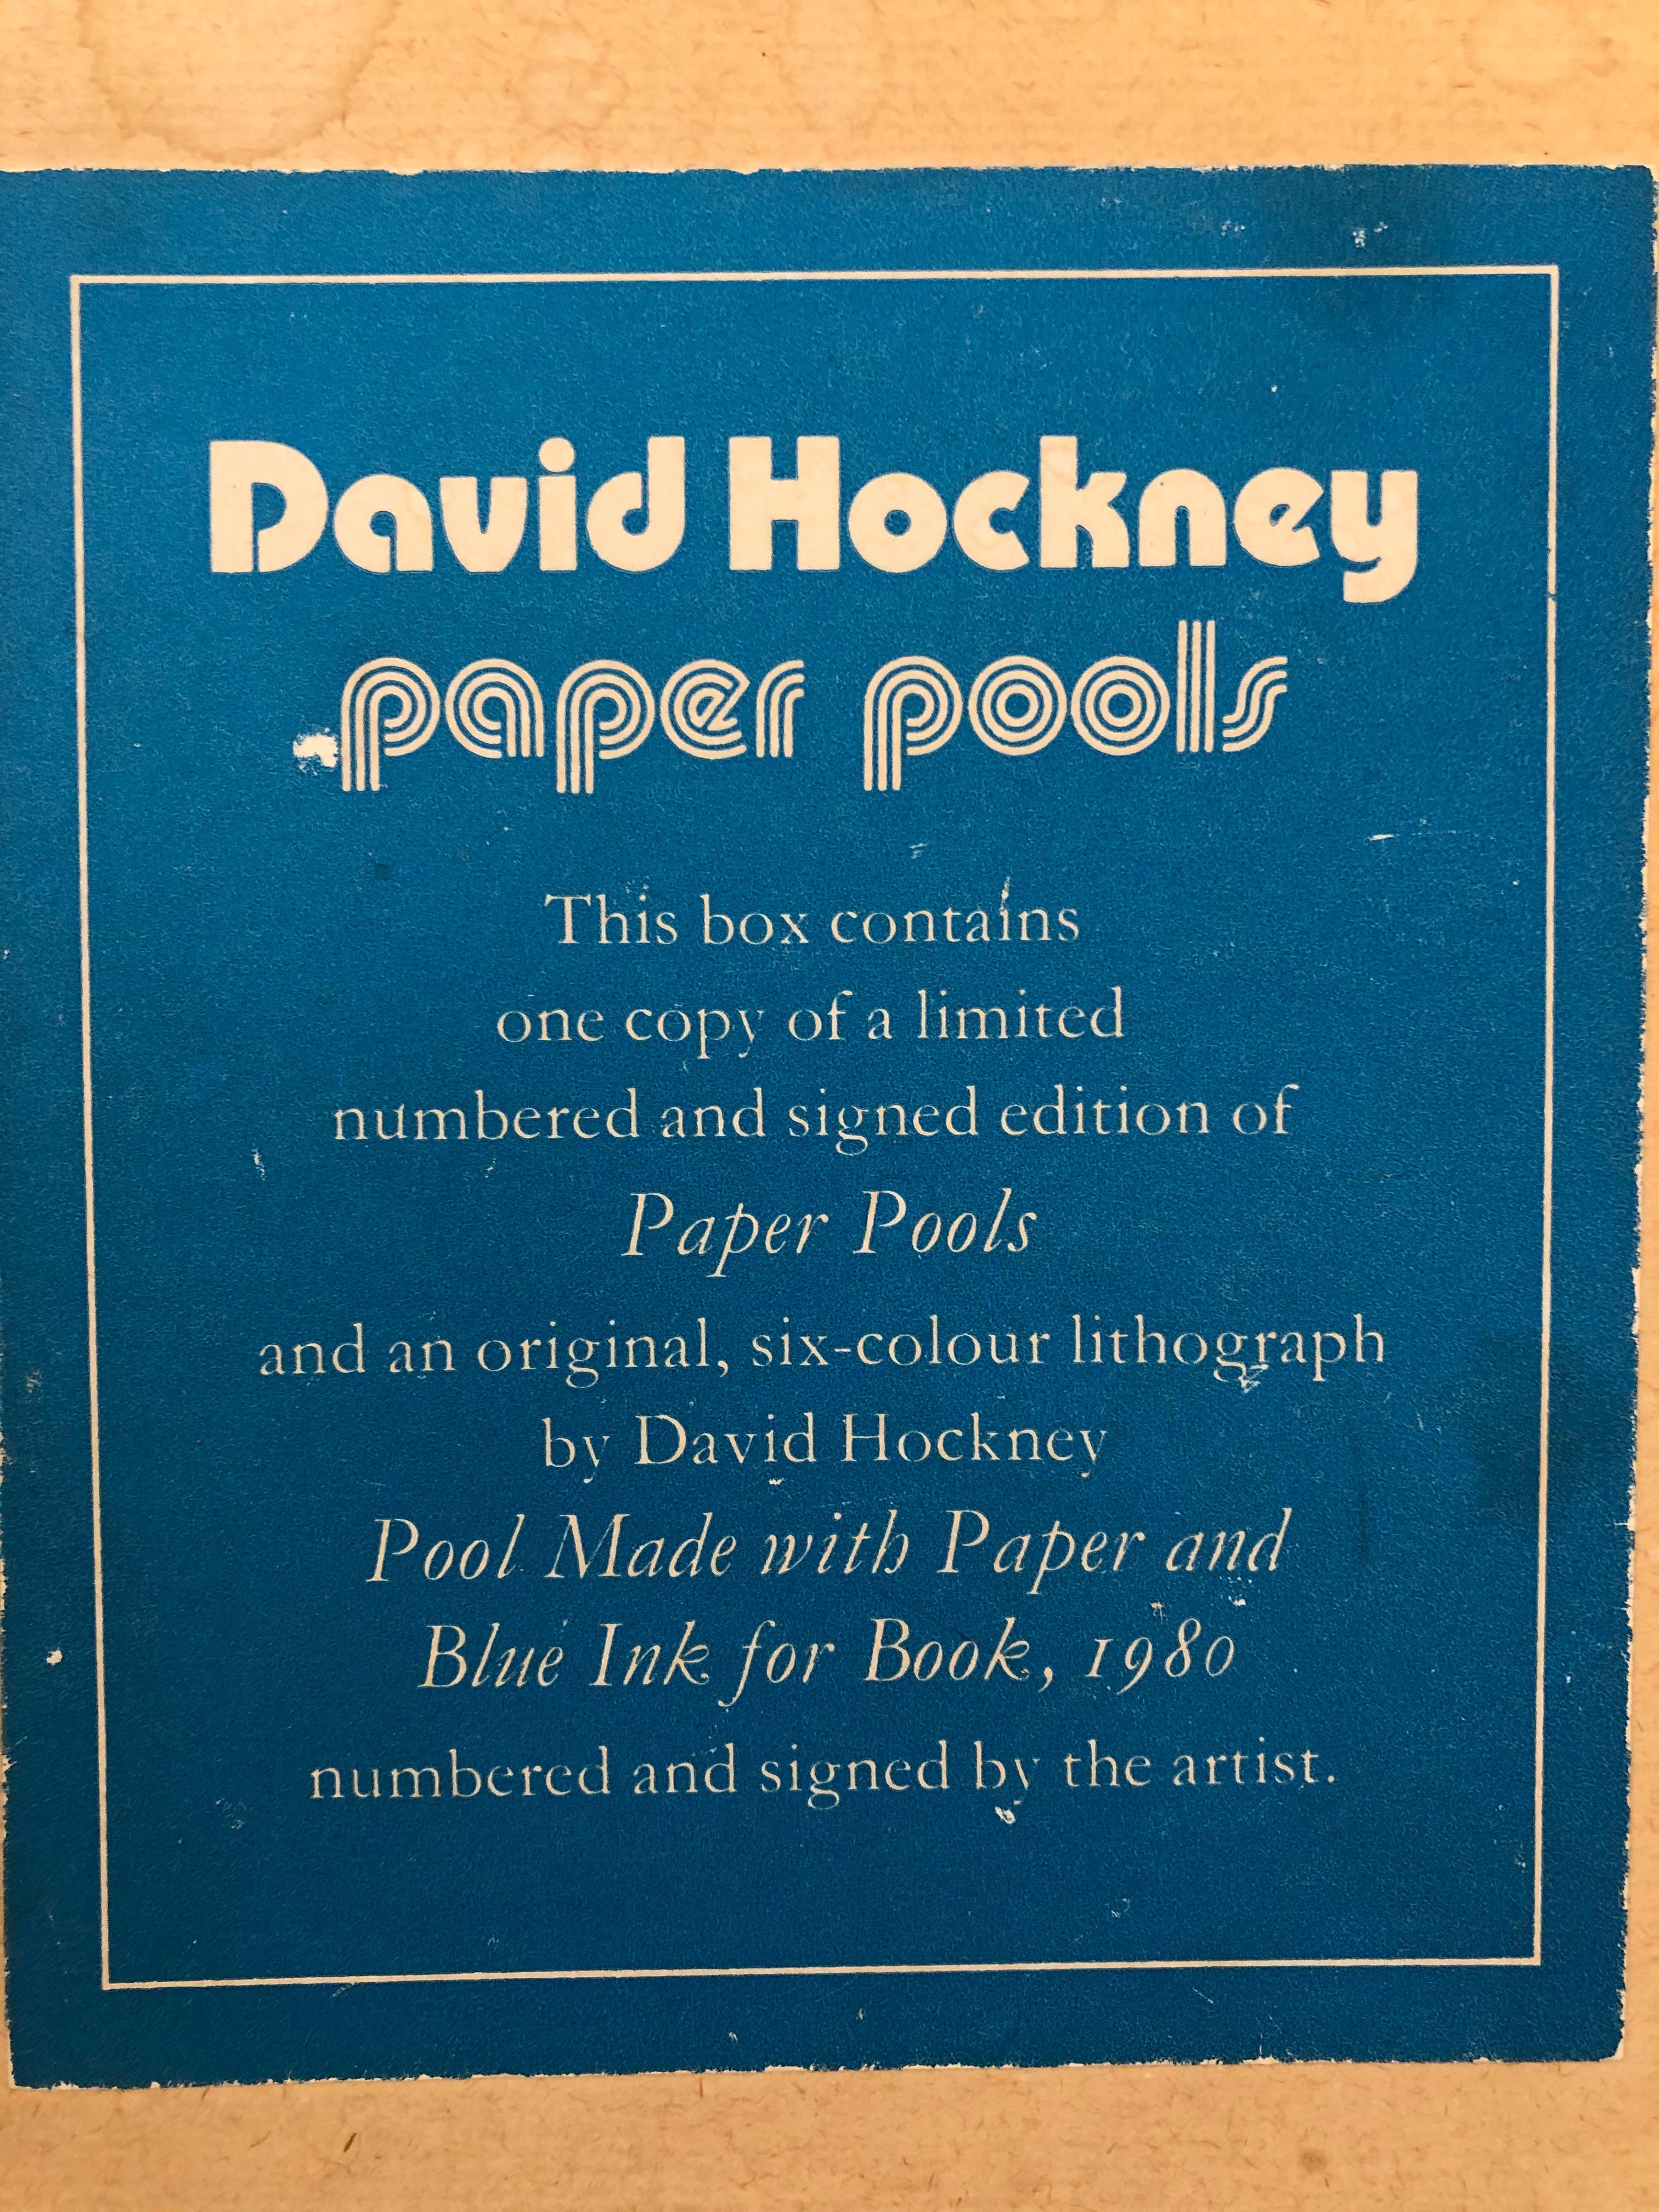 david hockney pool made with paper and ink